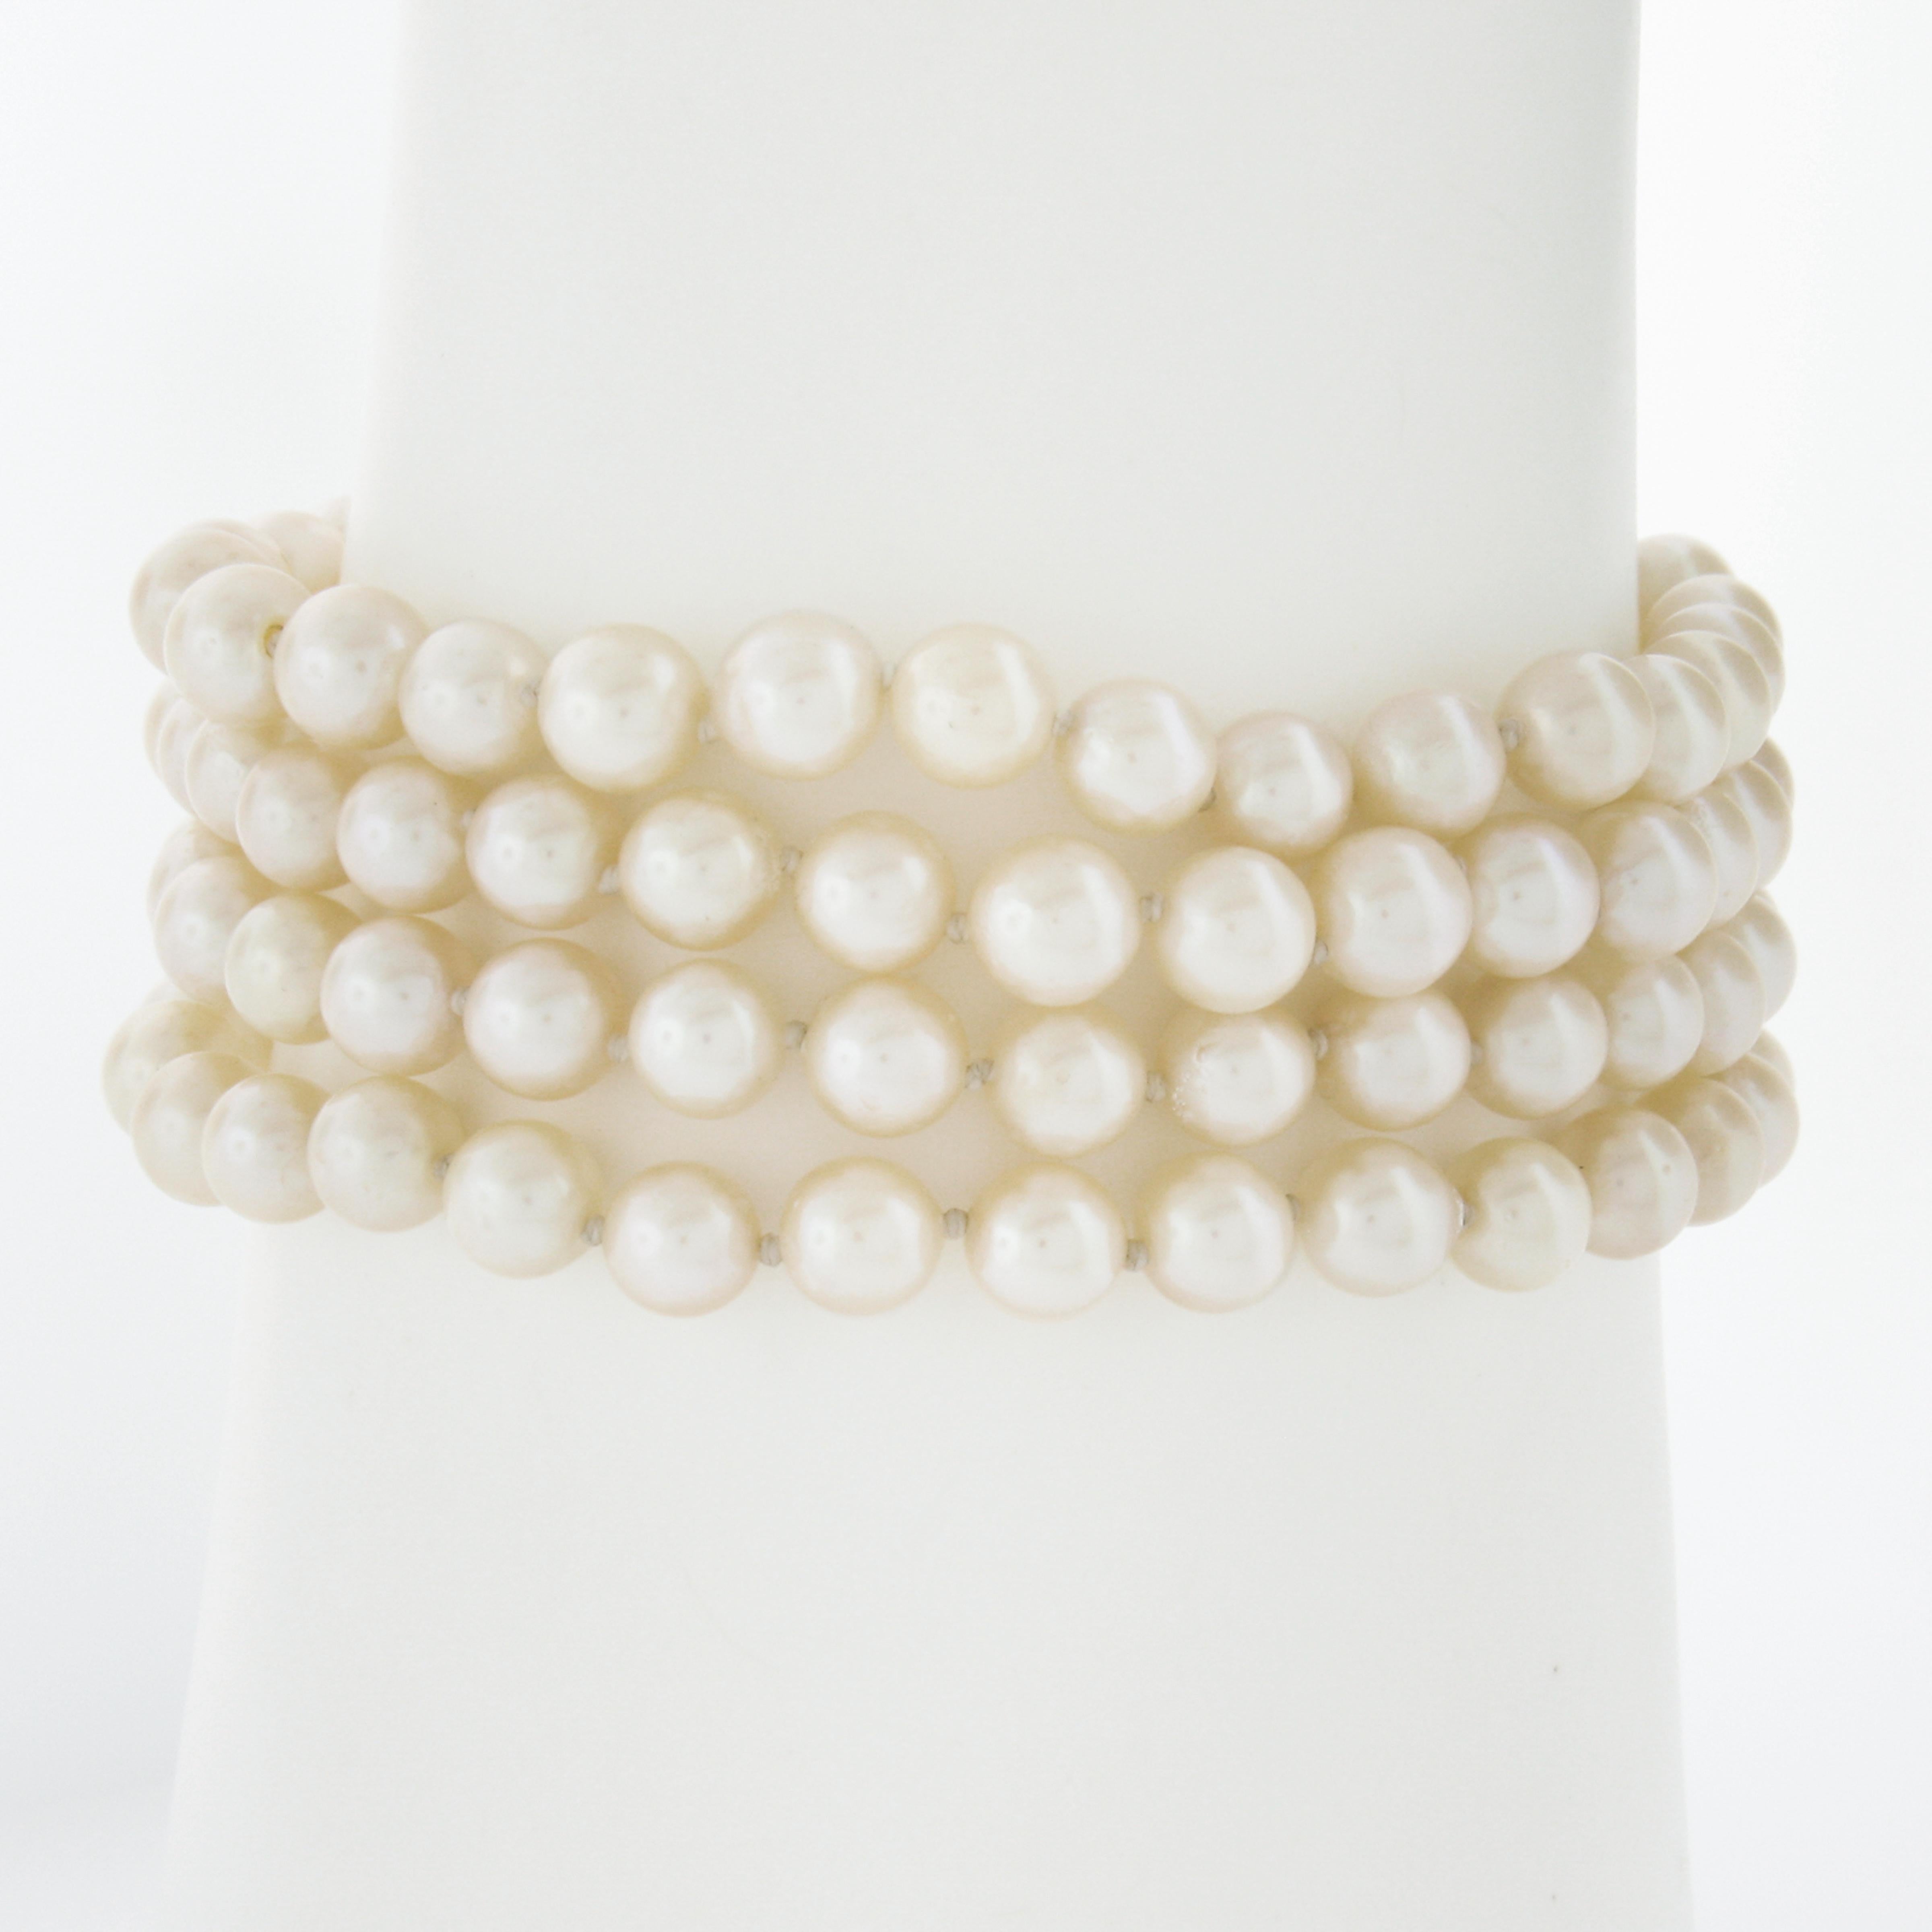 Round Cut Cultured Pearl w/ 14k Gold Textured Buckle Style 4 Row Strand 5-6mm Bracelet For Sale